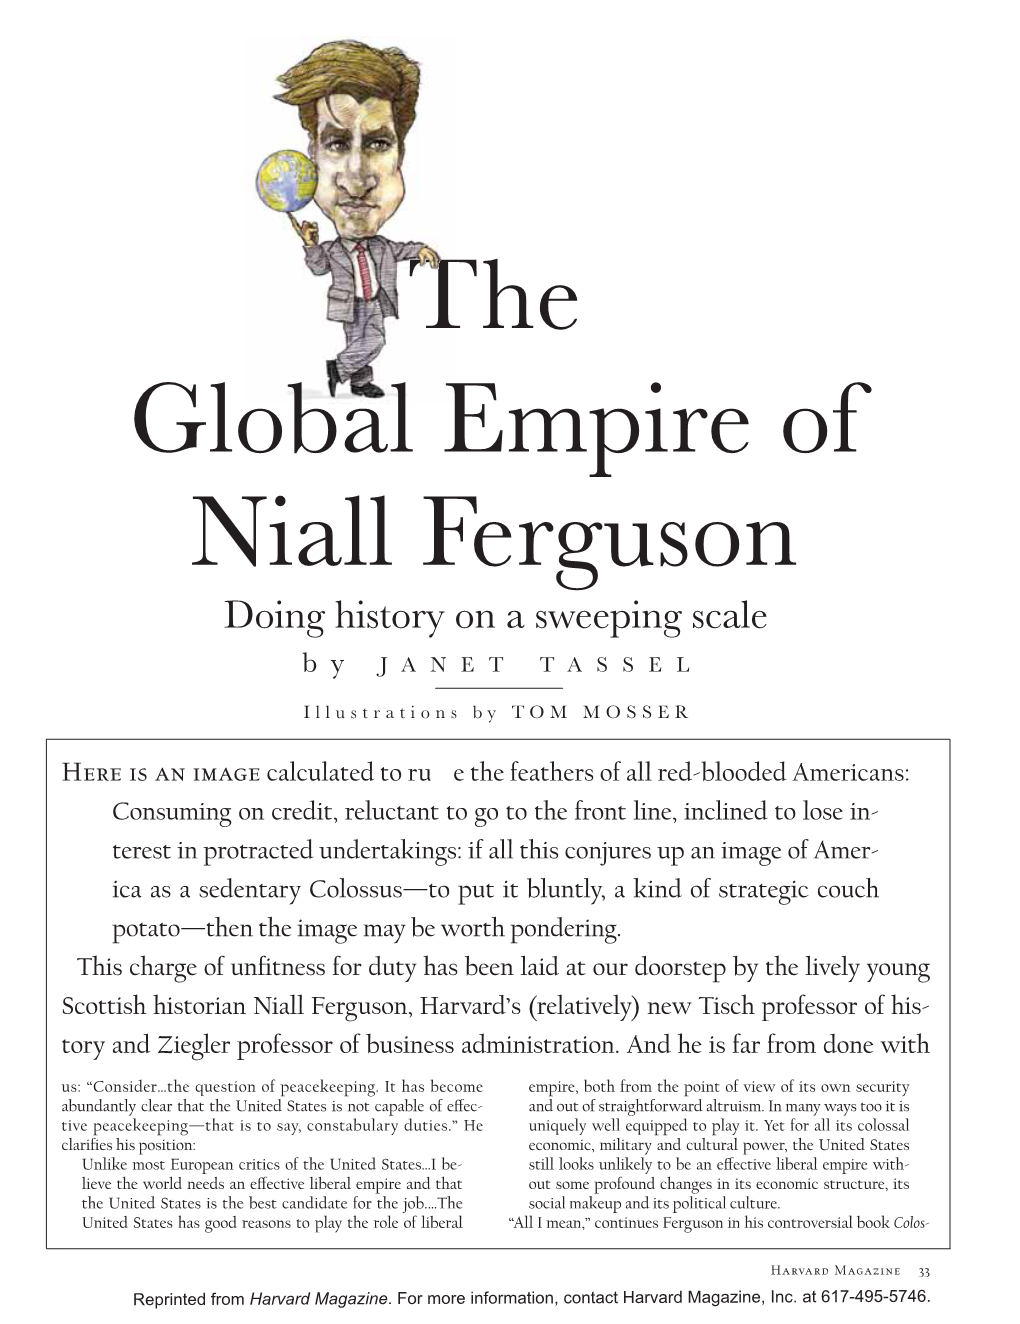 The Global Empire of Niall Ferguson Doing History on a Sweeping Scale by JANET TASSEL